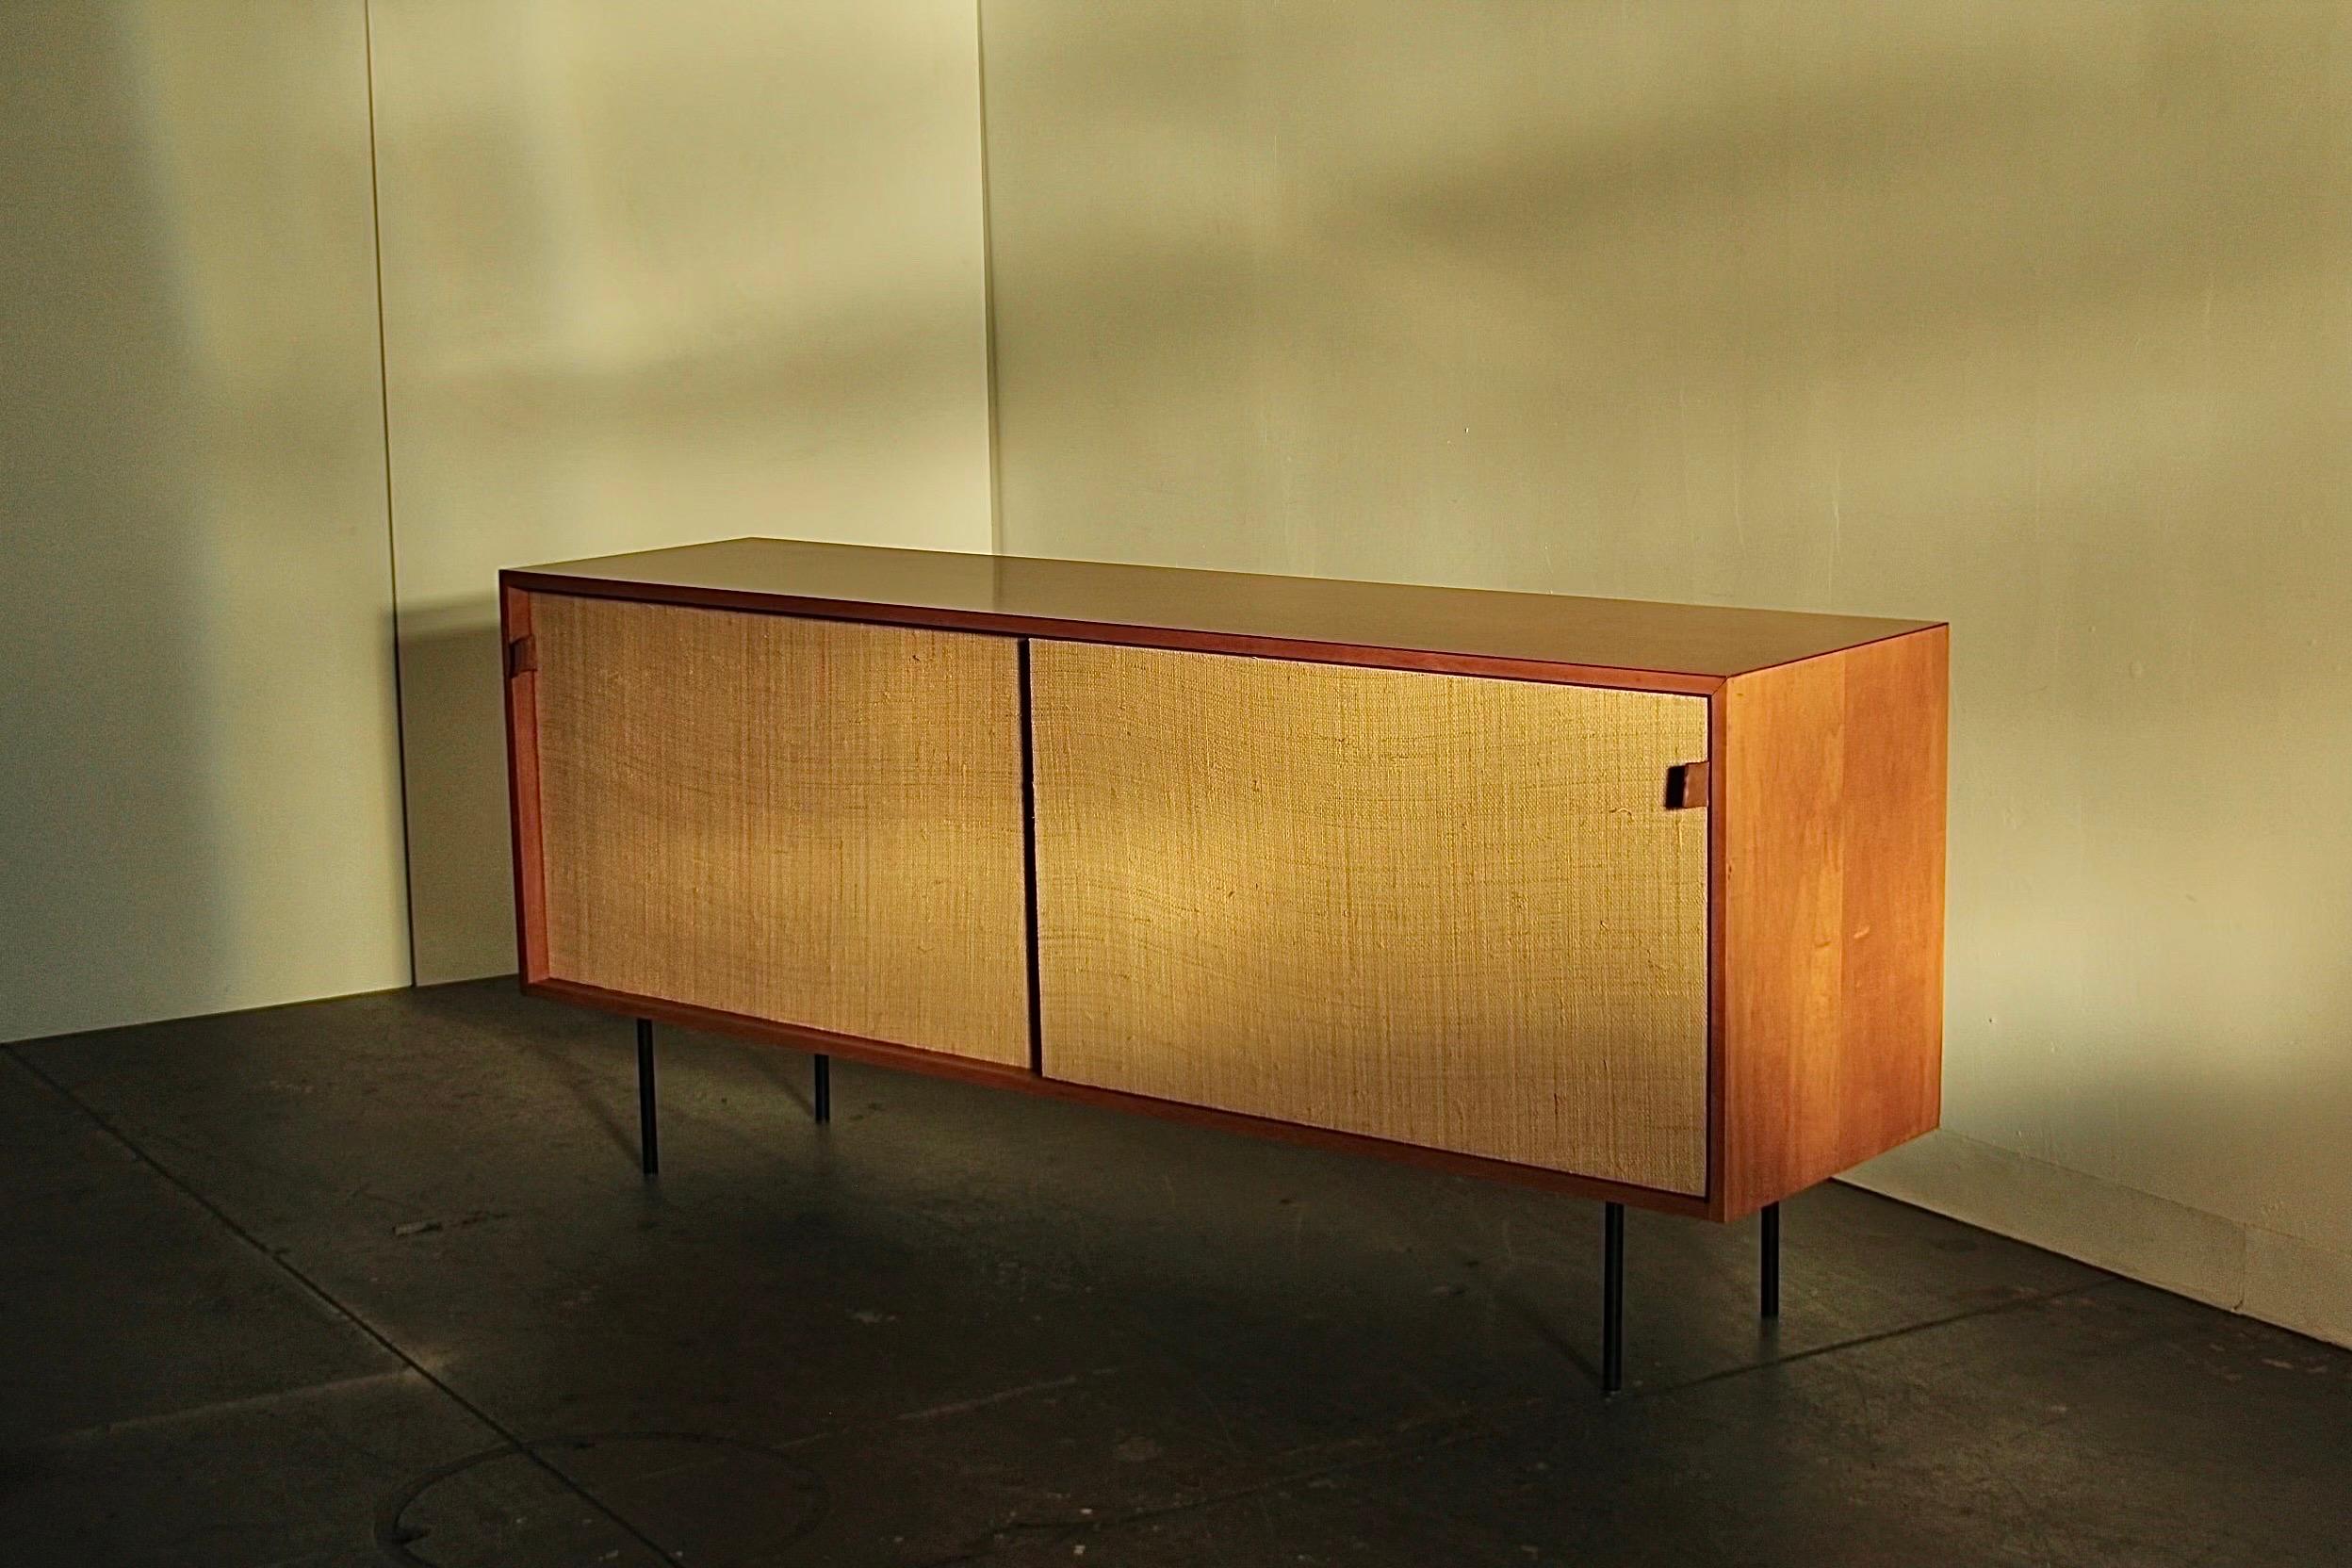 Florence Knoll 'Model 116' Iron Leg and Grass Cloth Credenza for Knoll, 1950s For Sale 10